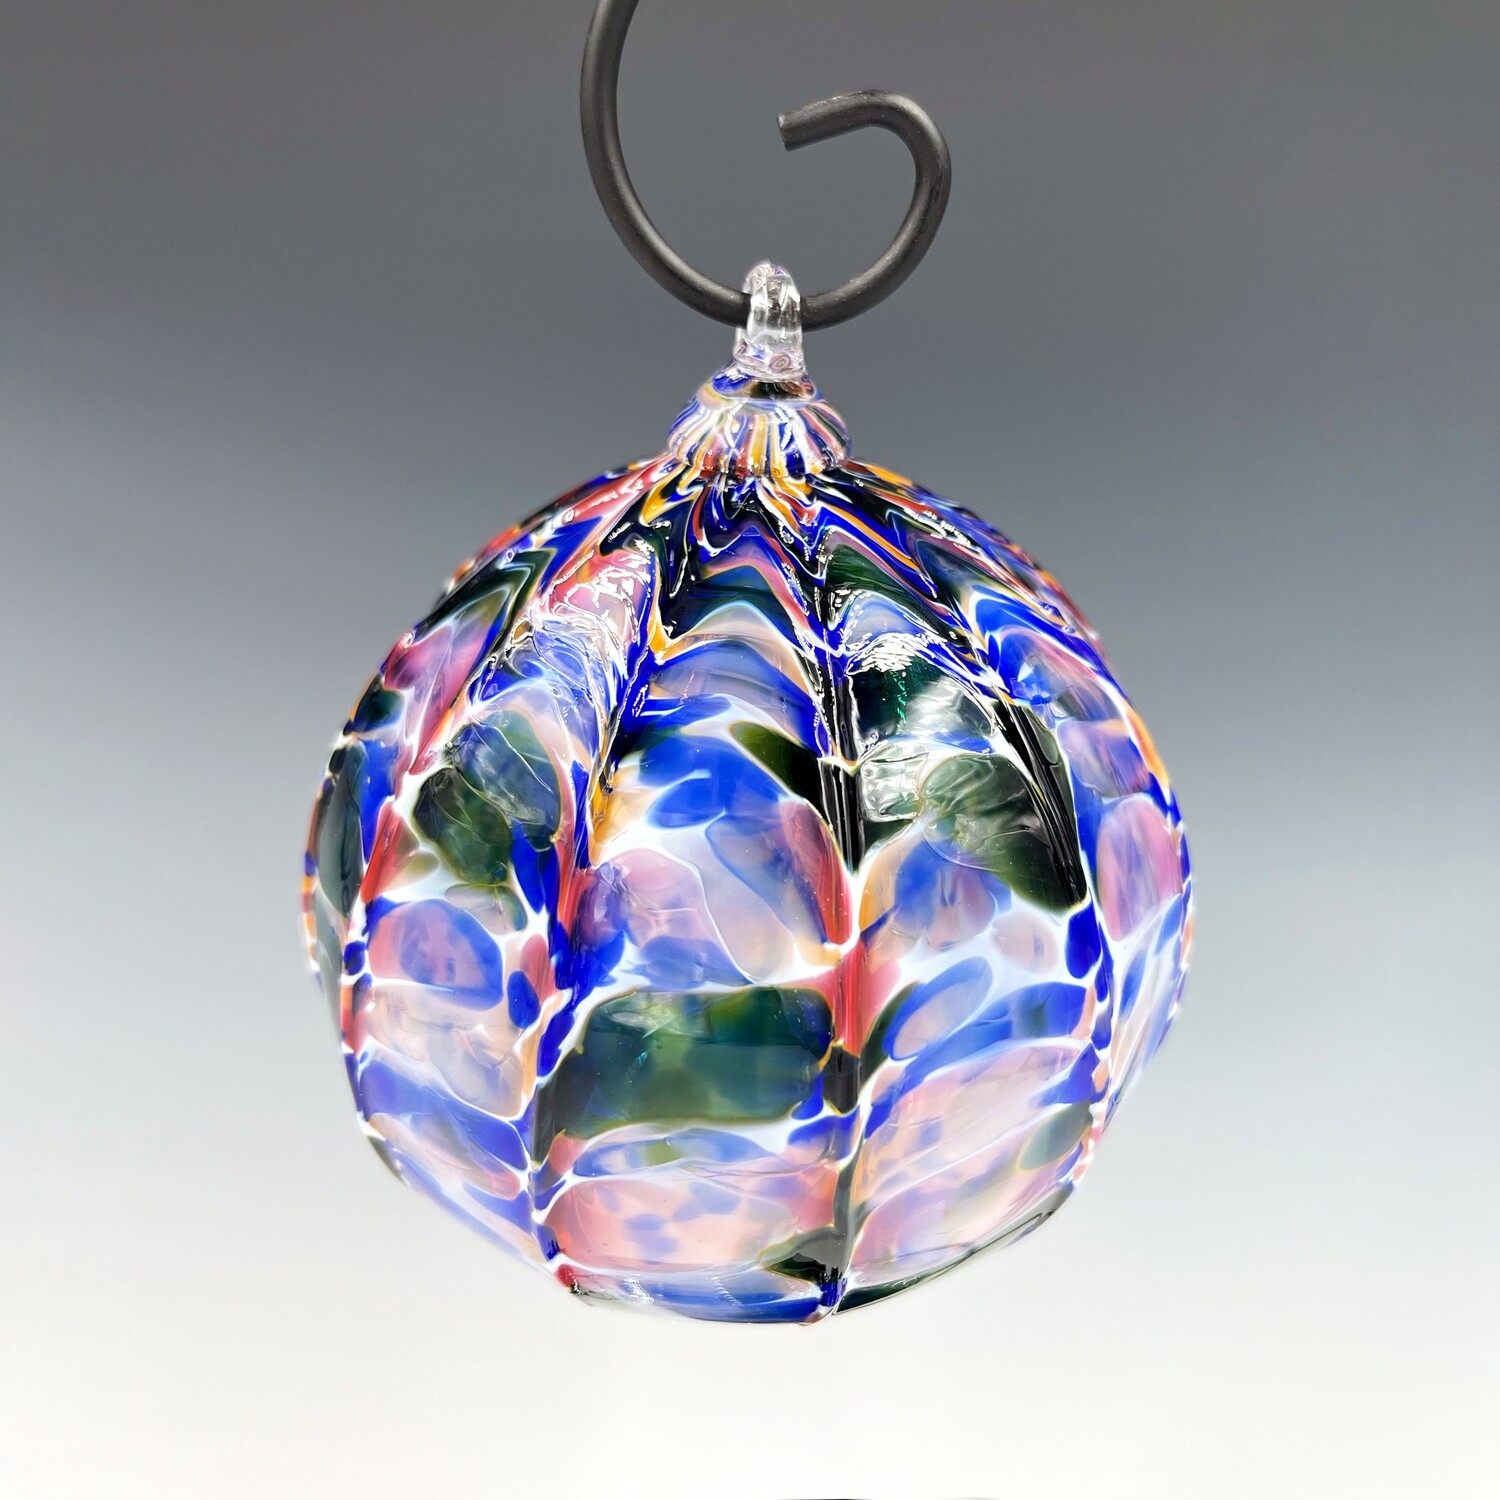 Glass Ornament in Sunset Mix